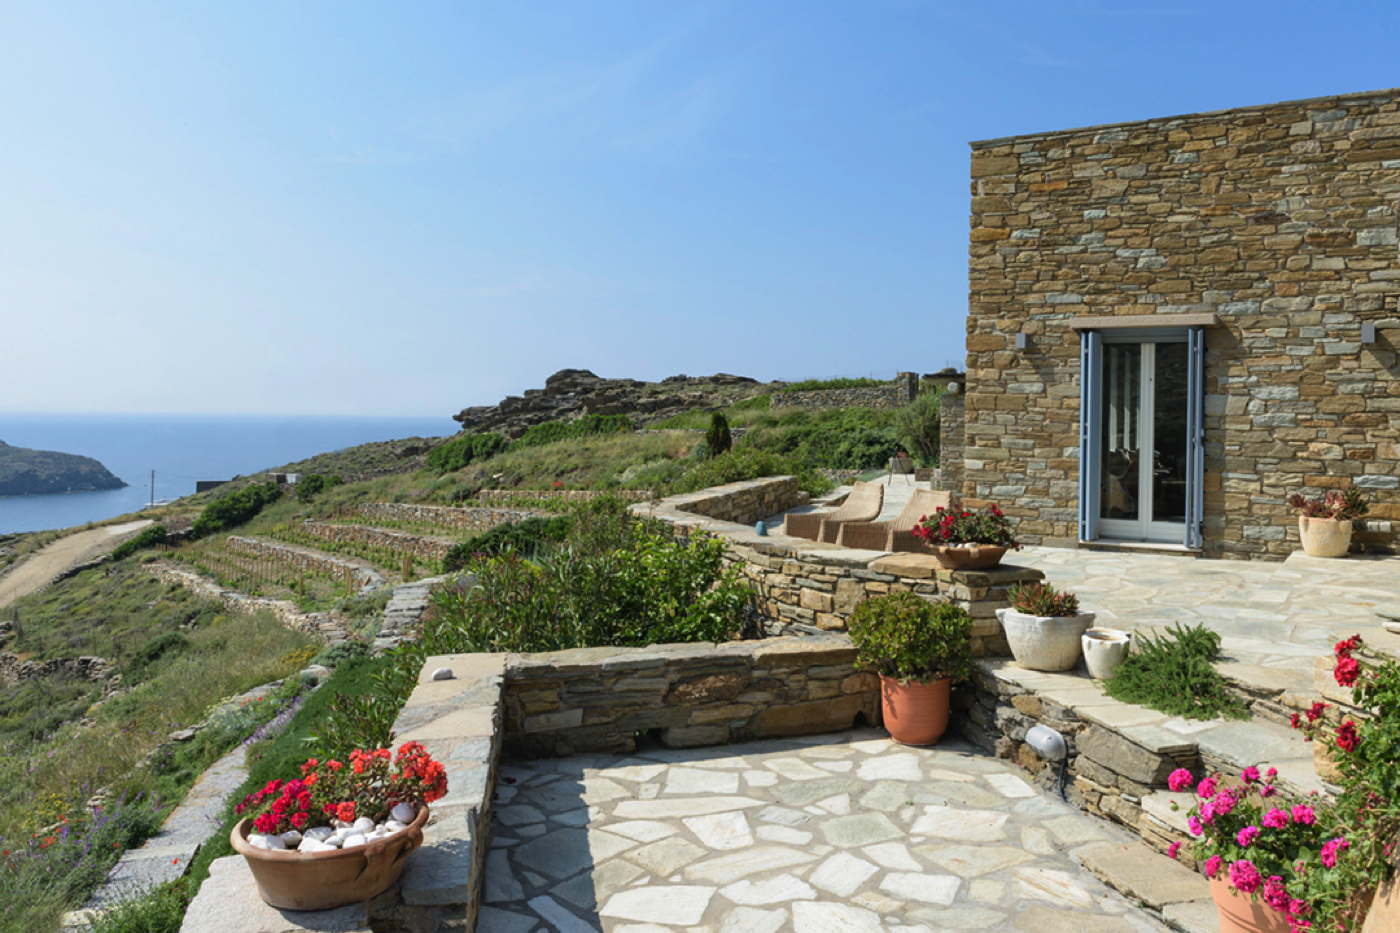 Holiday villa for families - pool - Tinos by the sea - Greece - Cyclades